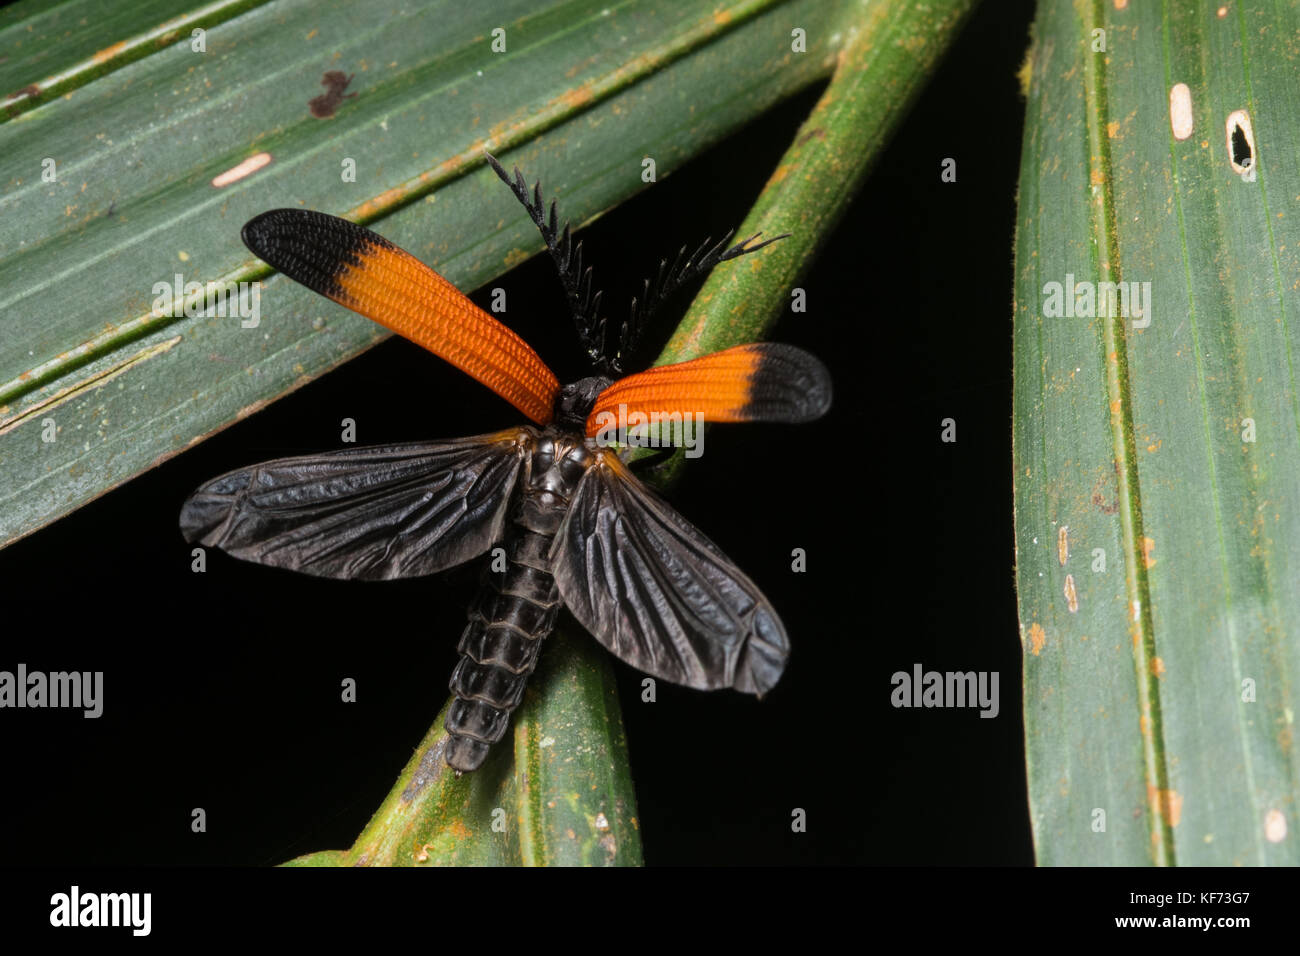 A net winged beetle photographed at the exact moment it opened its wings to take flight. Stock Photo